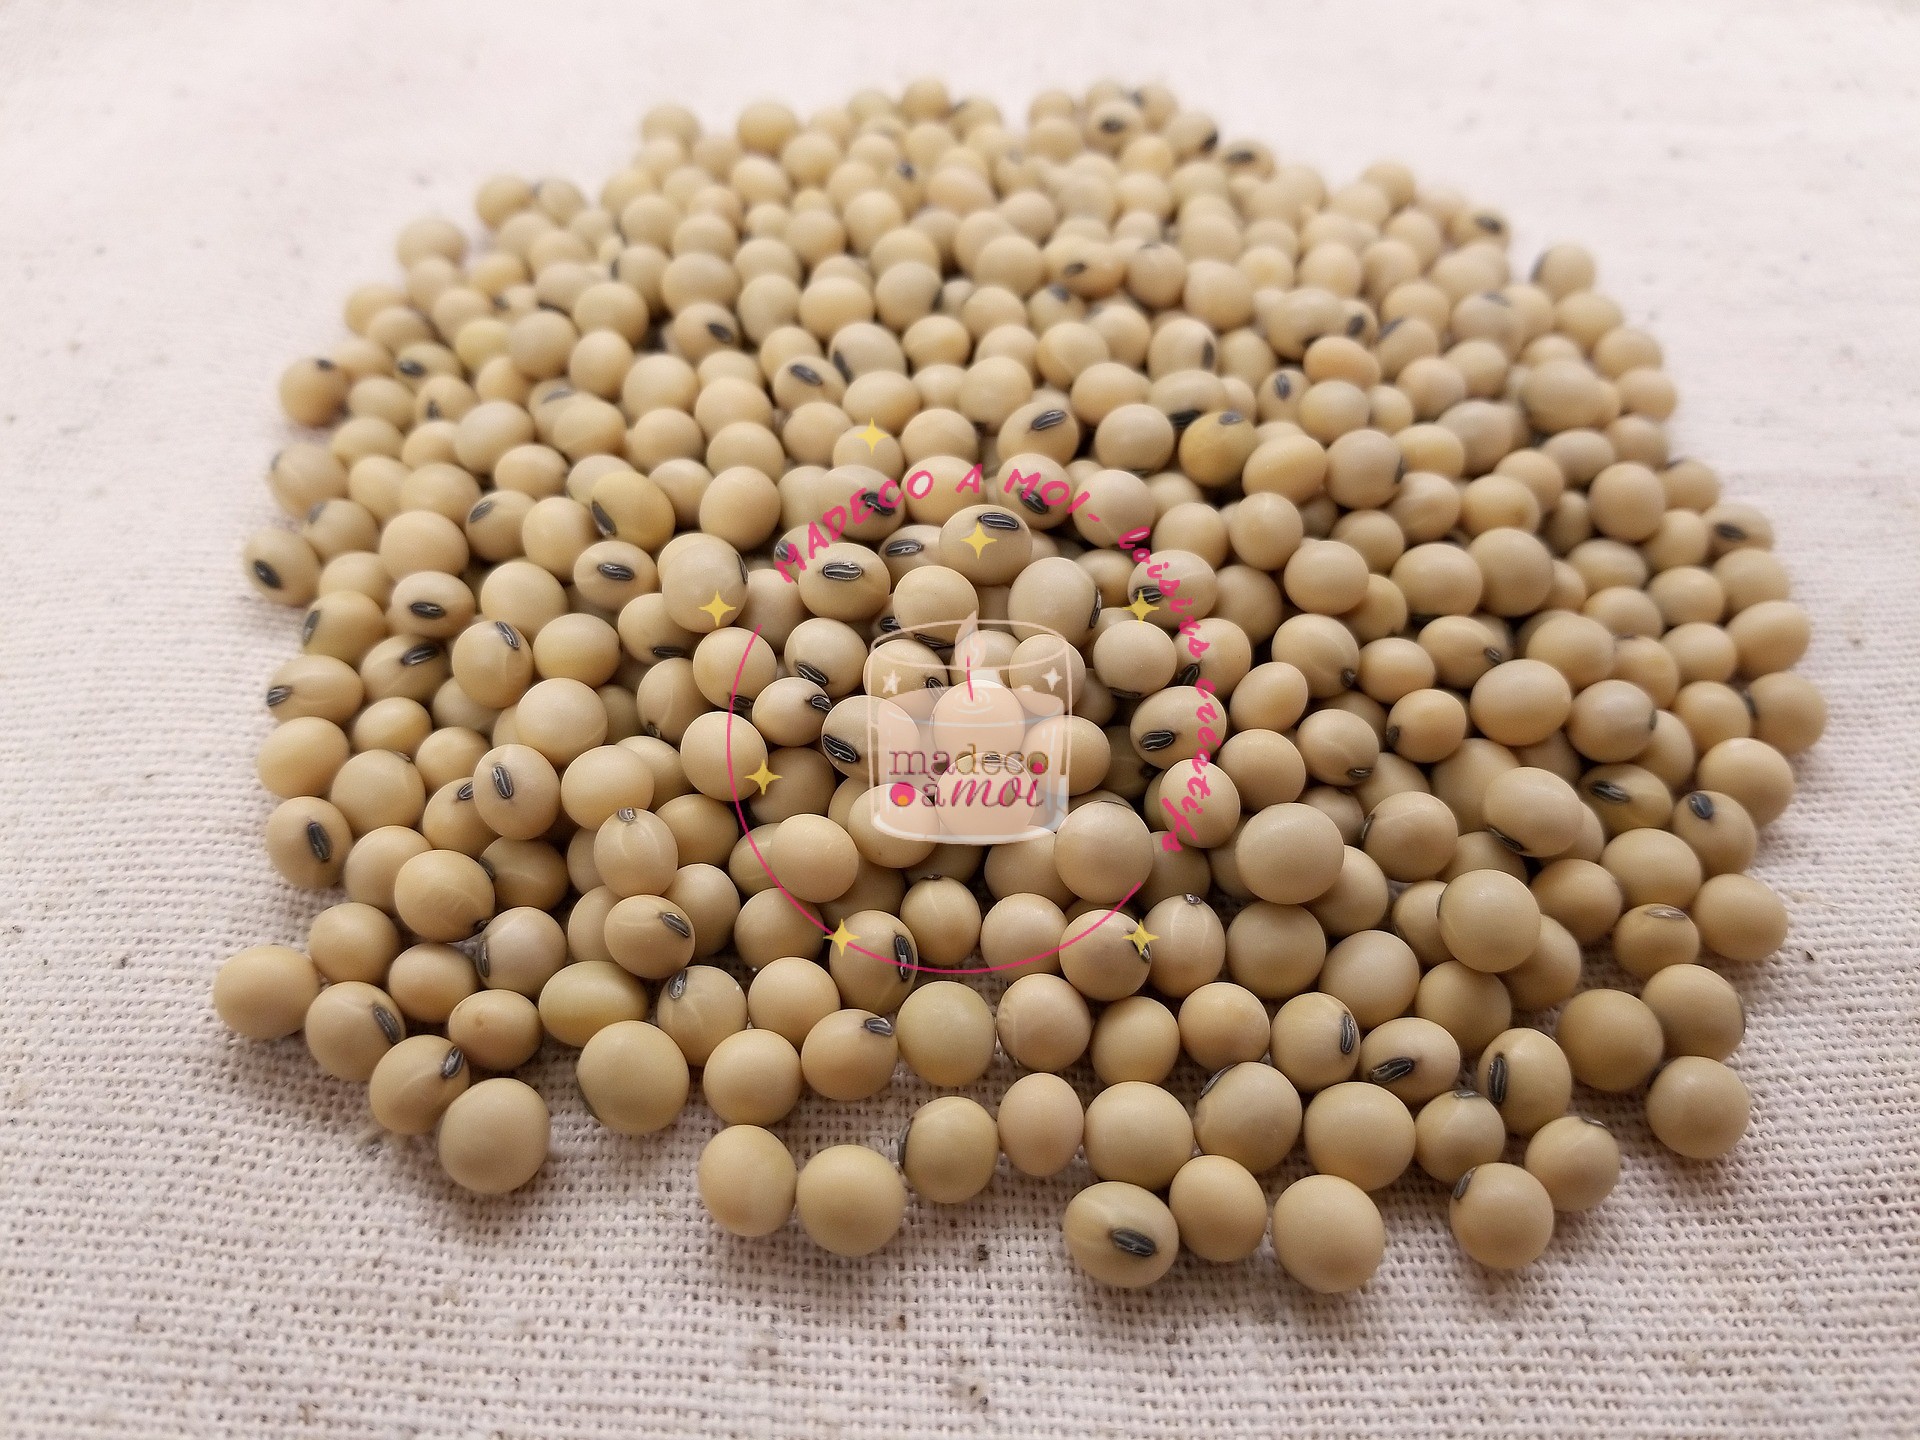 https://madecoamoi.com/storage/products/cires/soybean-3754425-1920.jpg